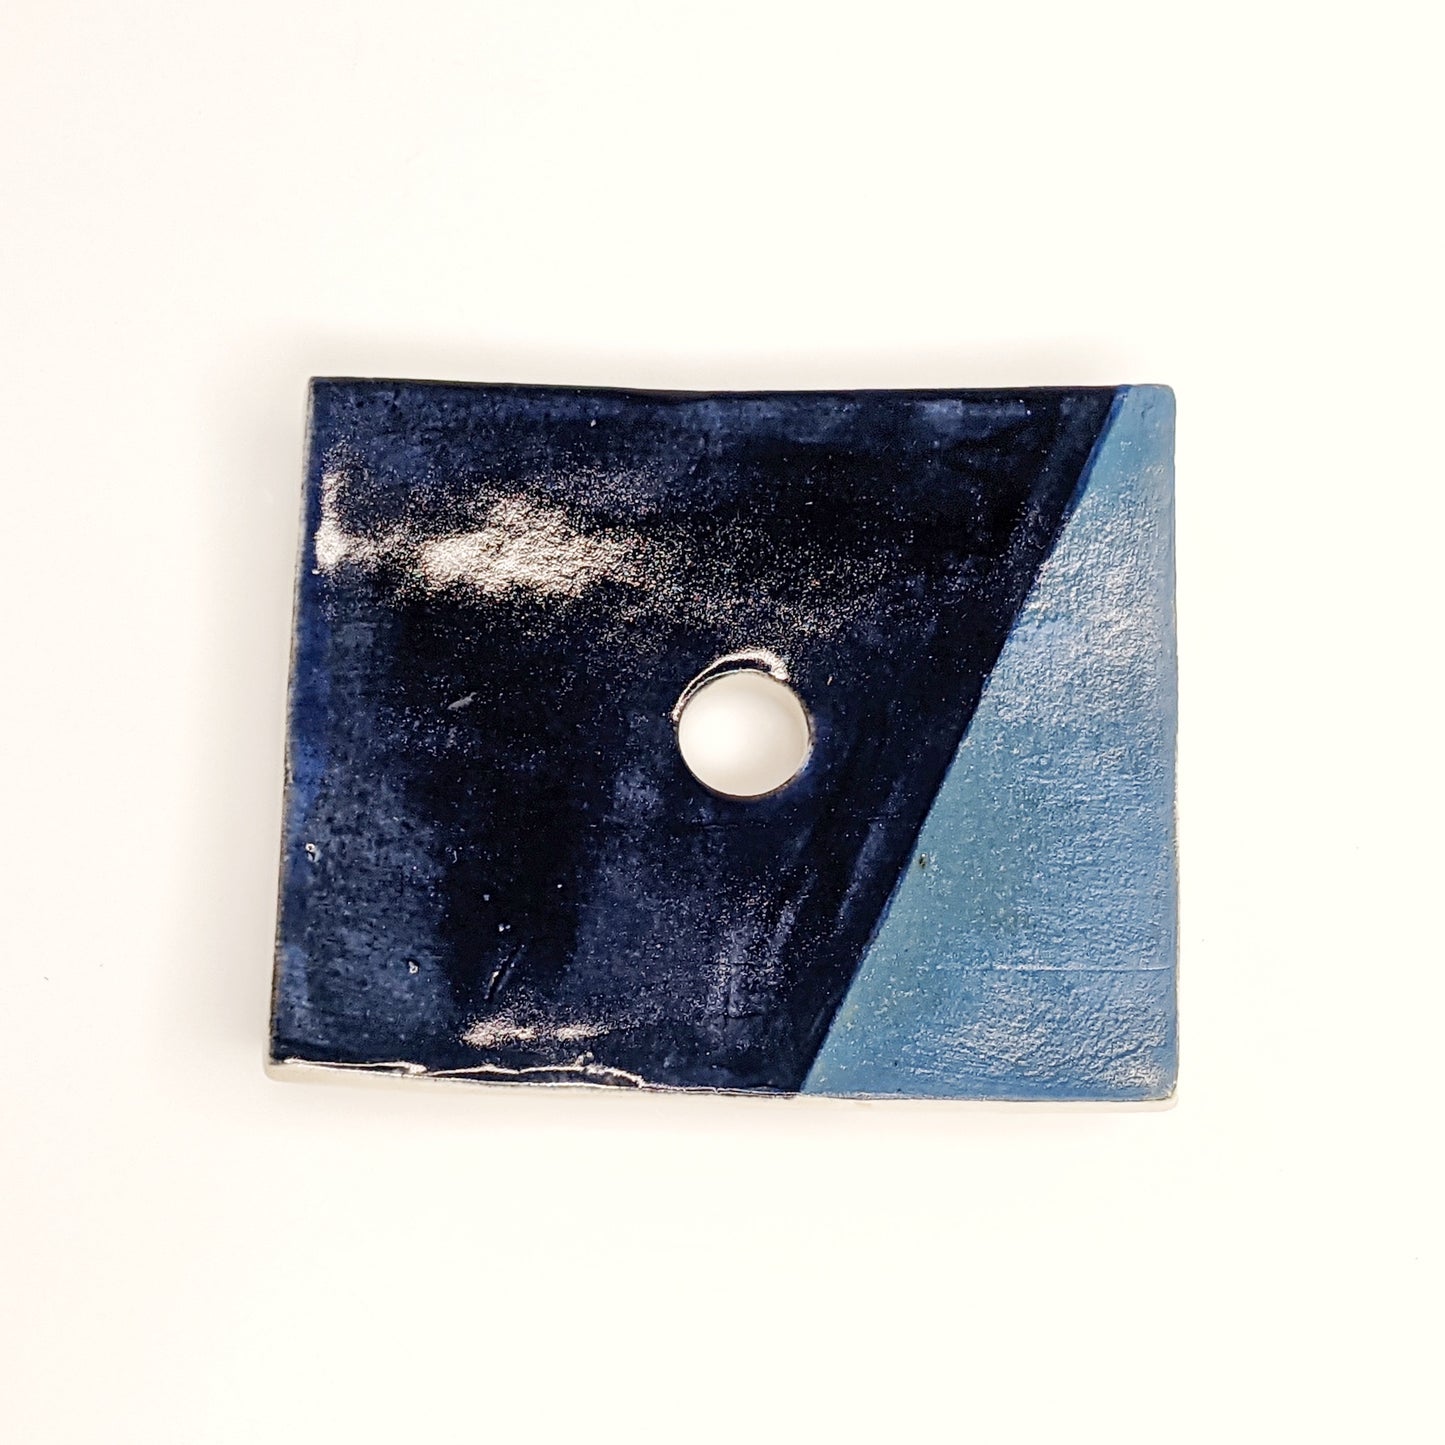 ceramic soap dish inspired by a wave of  water on the lake.